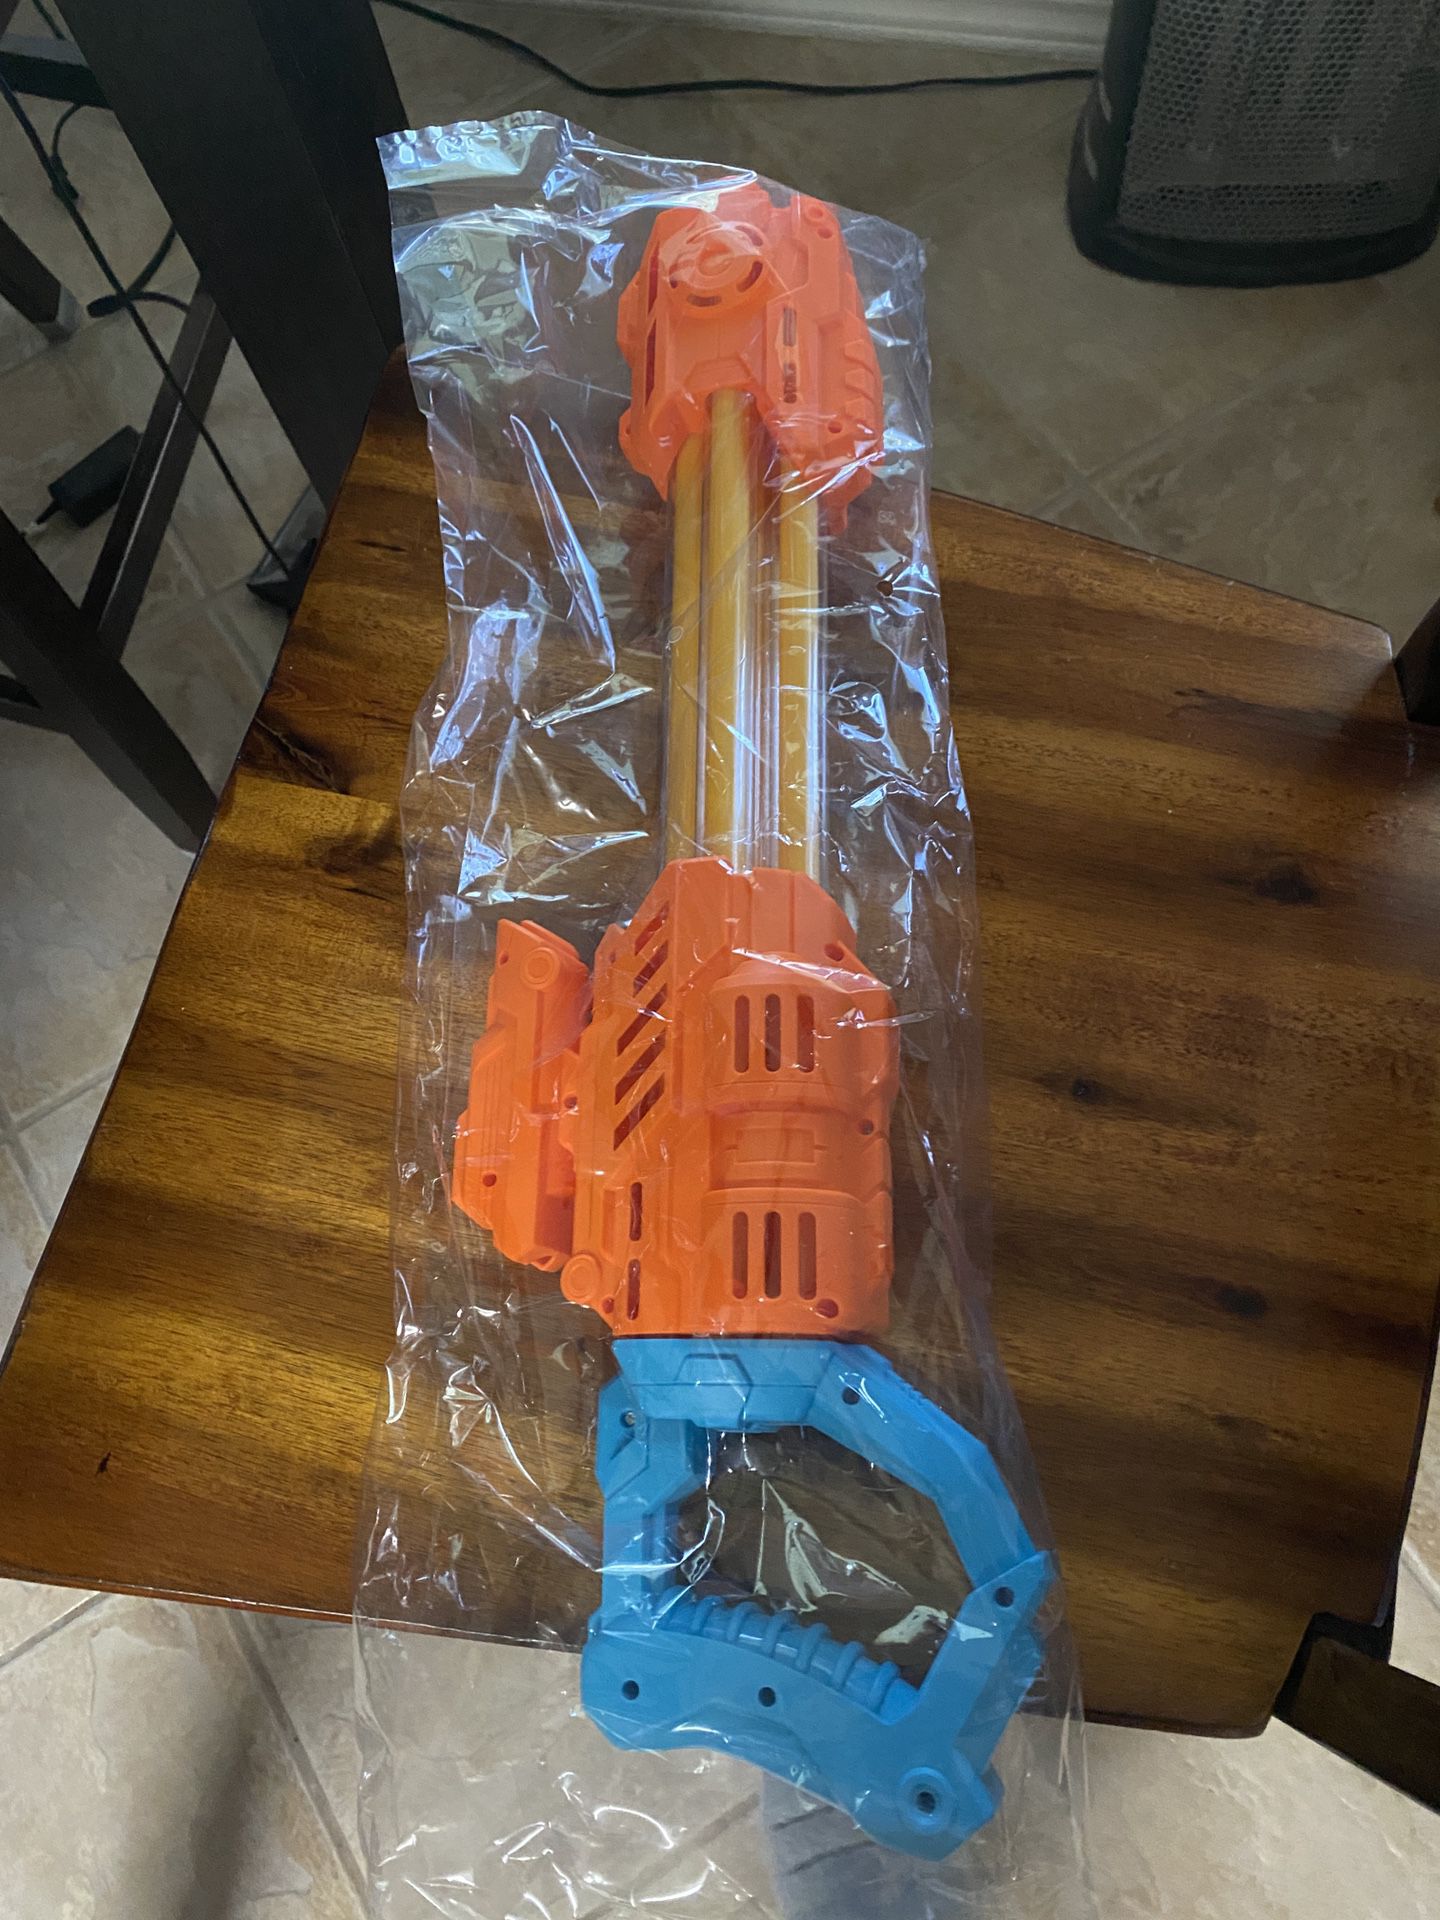 Spyra Water Blaster 2 for Sale in Irving, TX - OfferUp